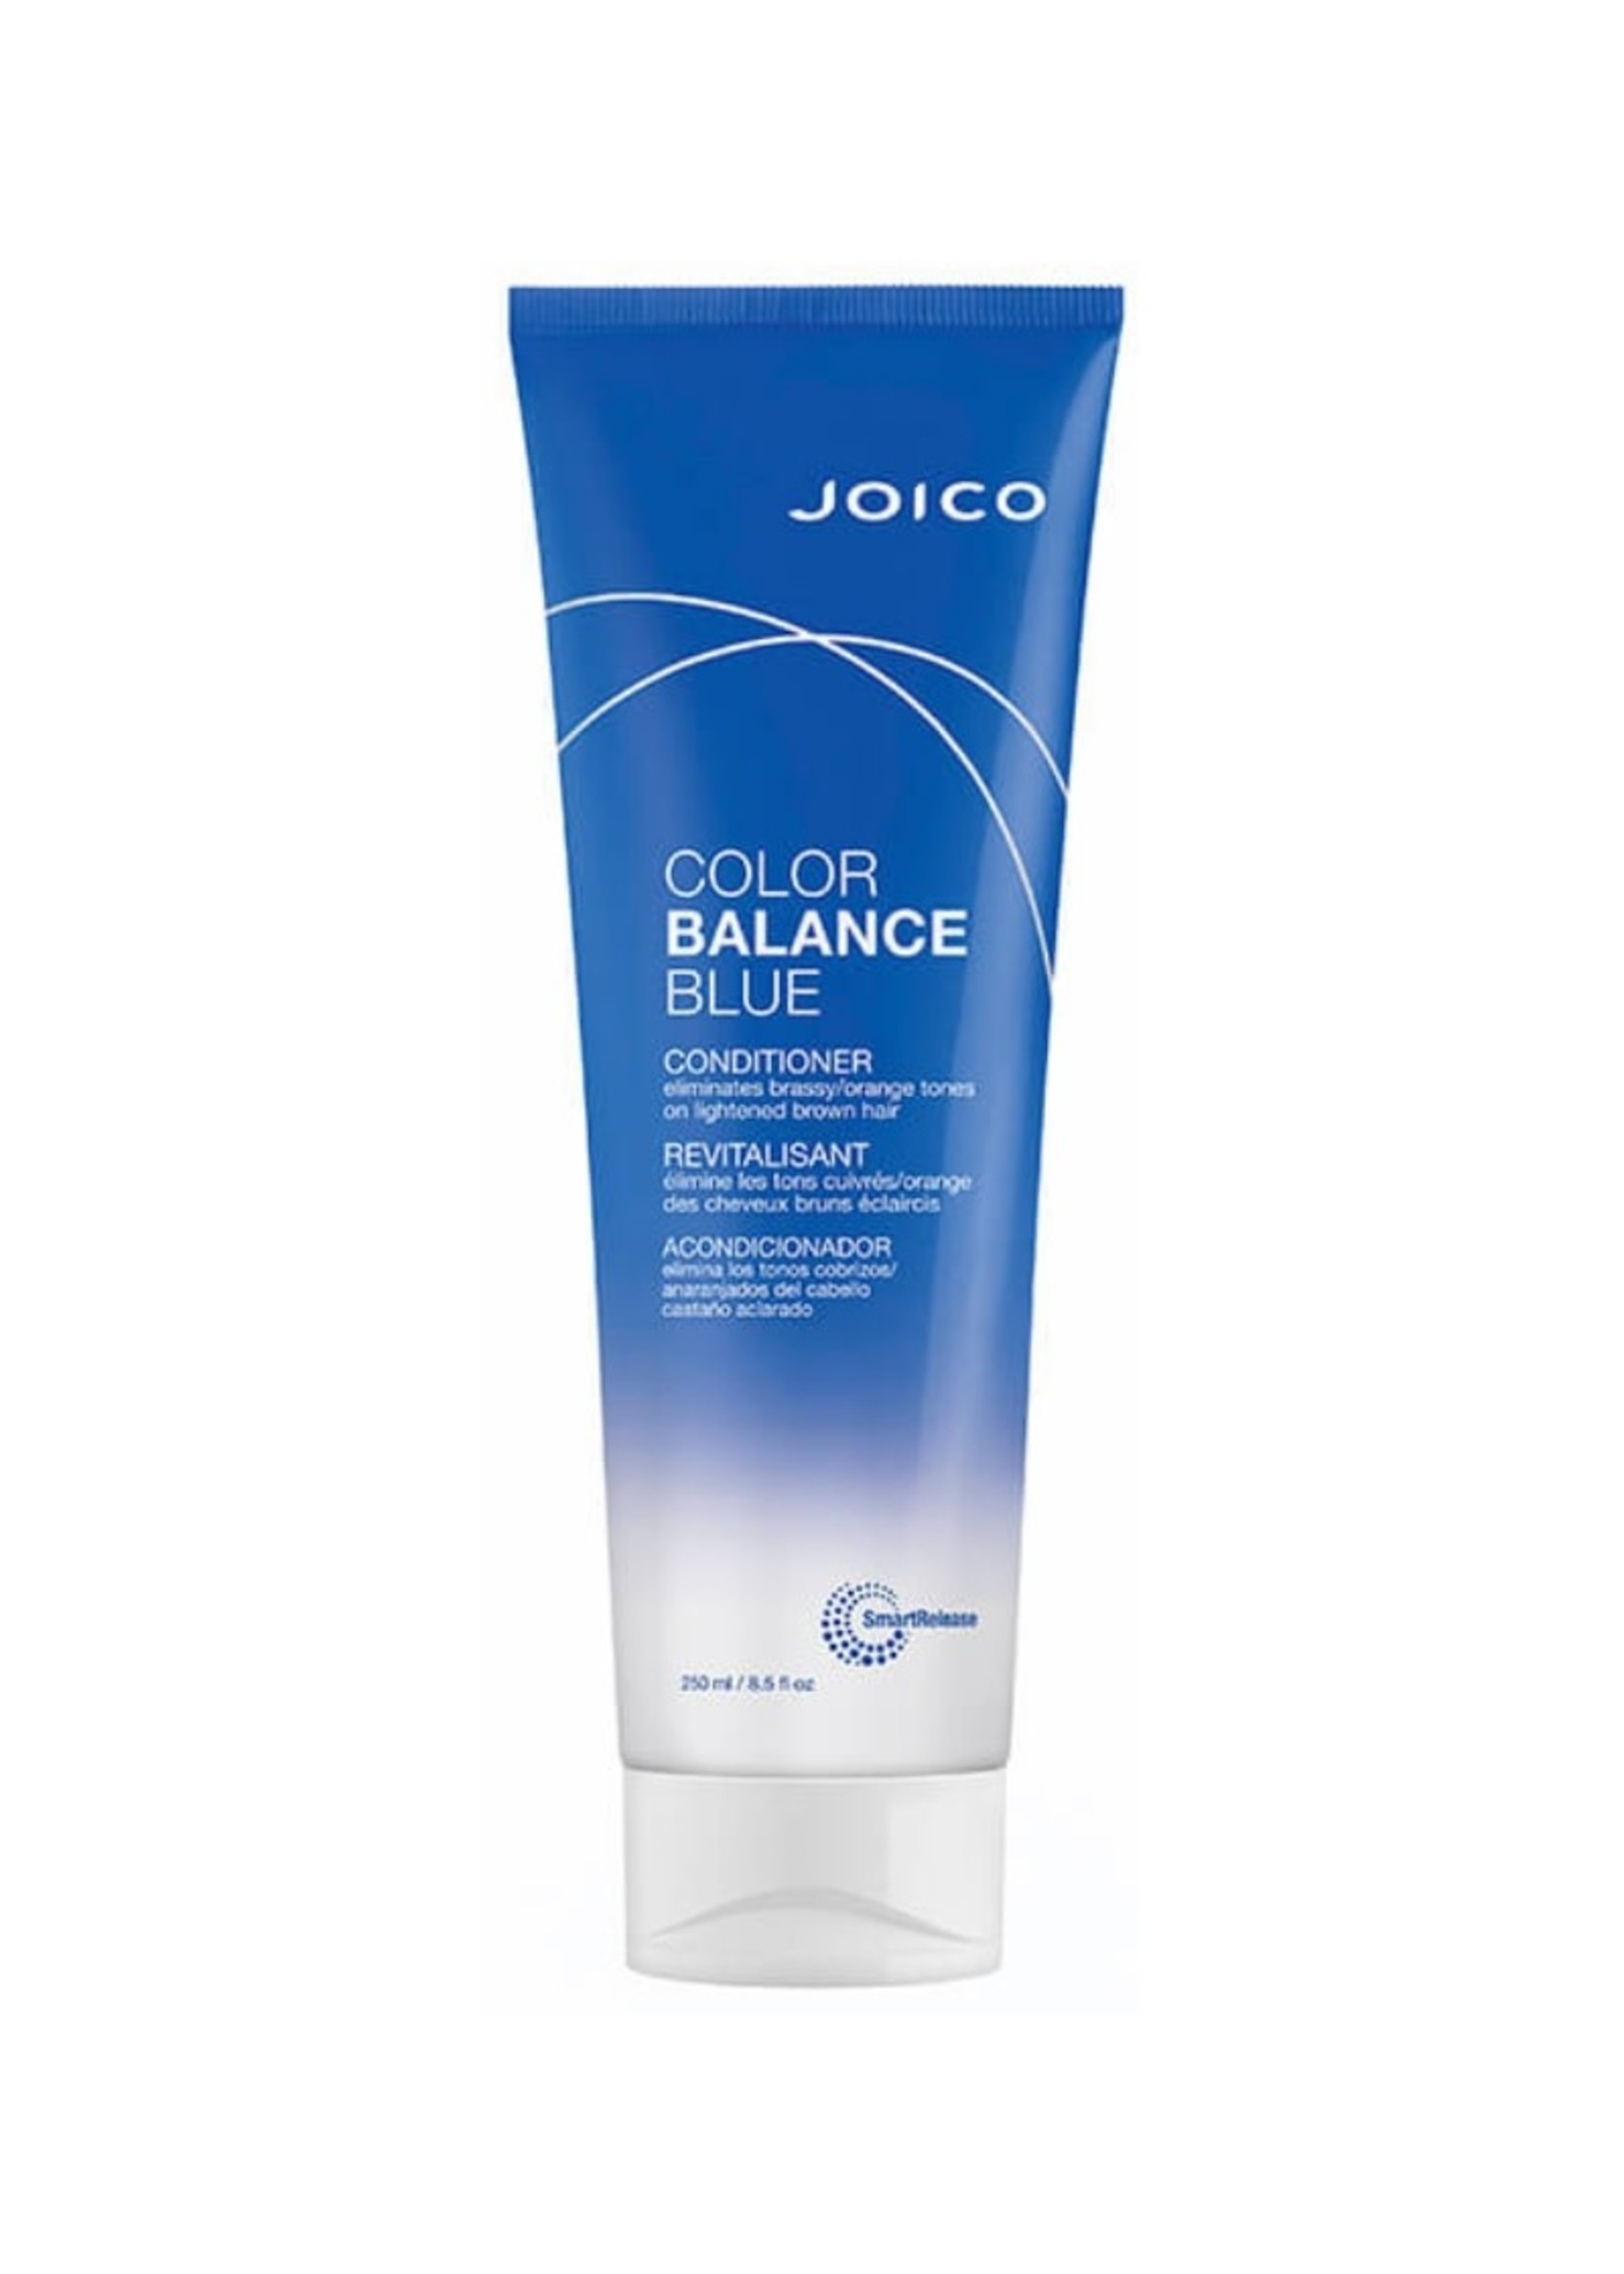 Joico Joico Color Balance Blue Conditioner 250ml